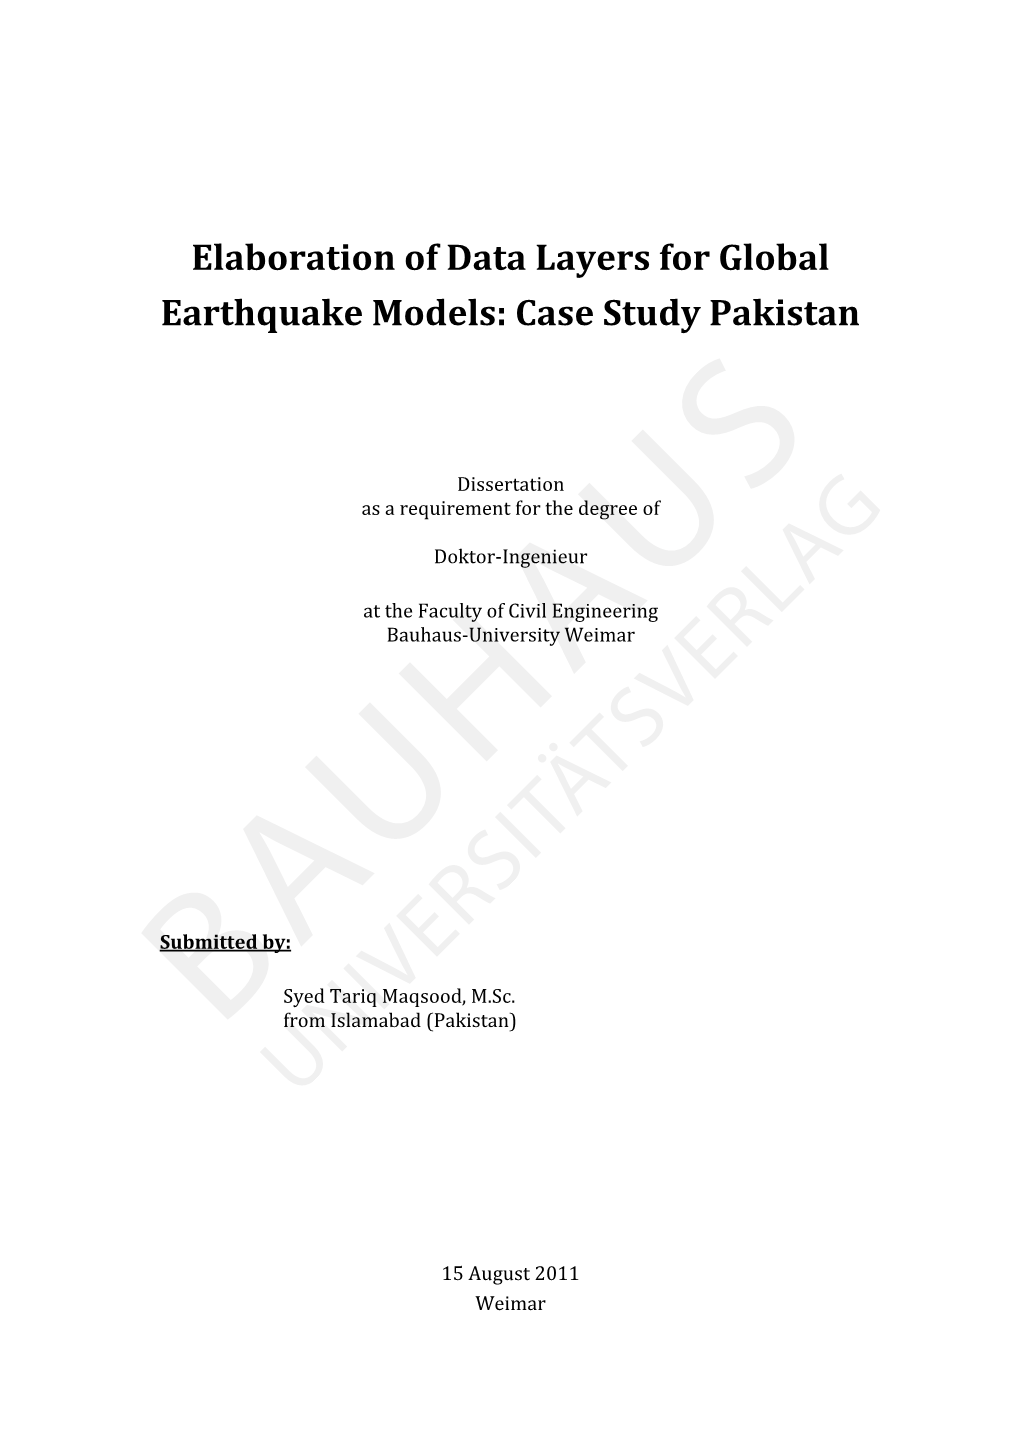 Elaboration of Data Layers for Global Earthquake Models: Case Study Pakistan